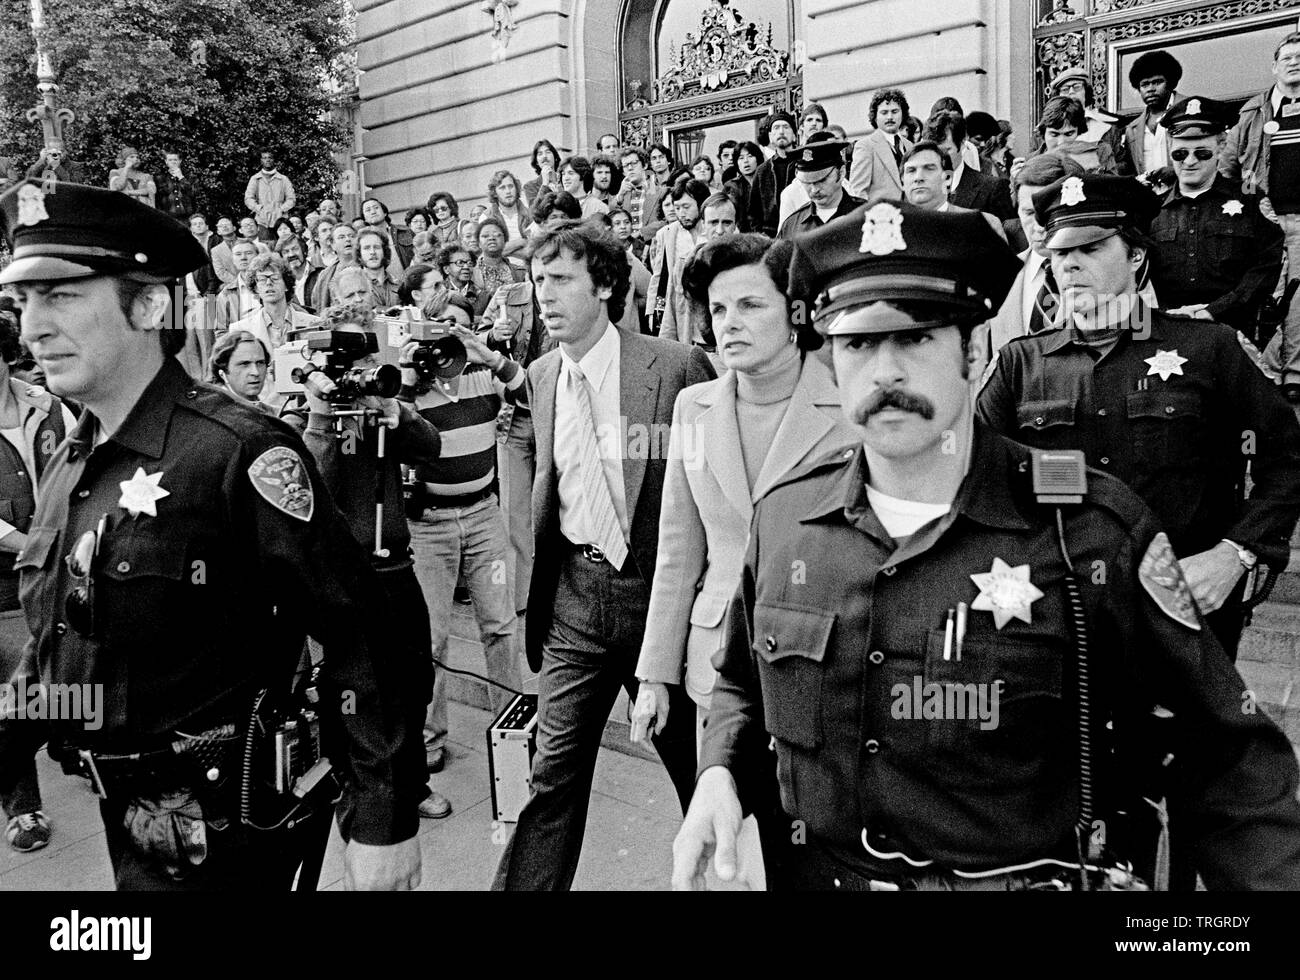 acting Mayor Dianne Feinstein and her husband Richard Blum leave San Francisco City Hall under police escort after Mayor Moscone and Harvey Milk were assassinated. San Francisco, 11/27/1978 Stock Photo